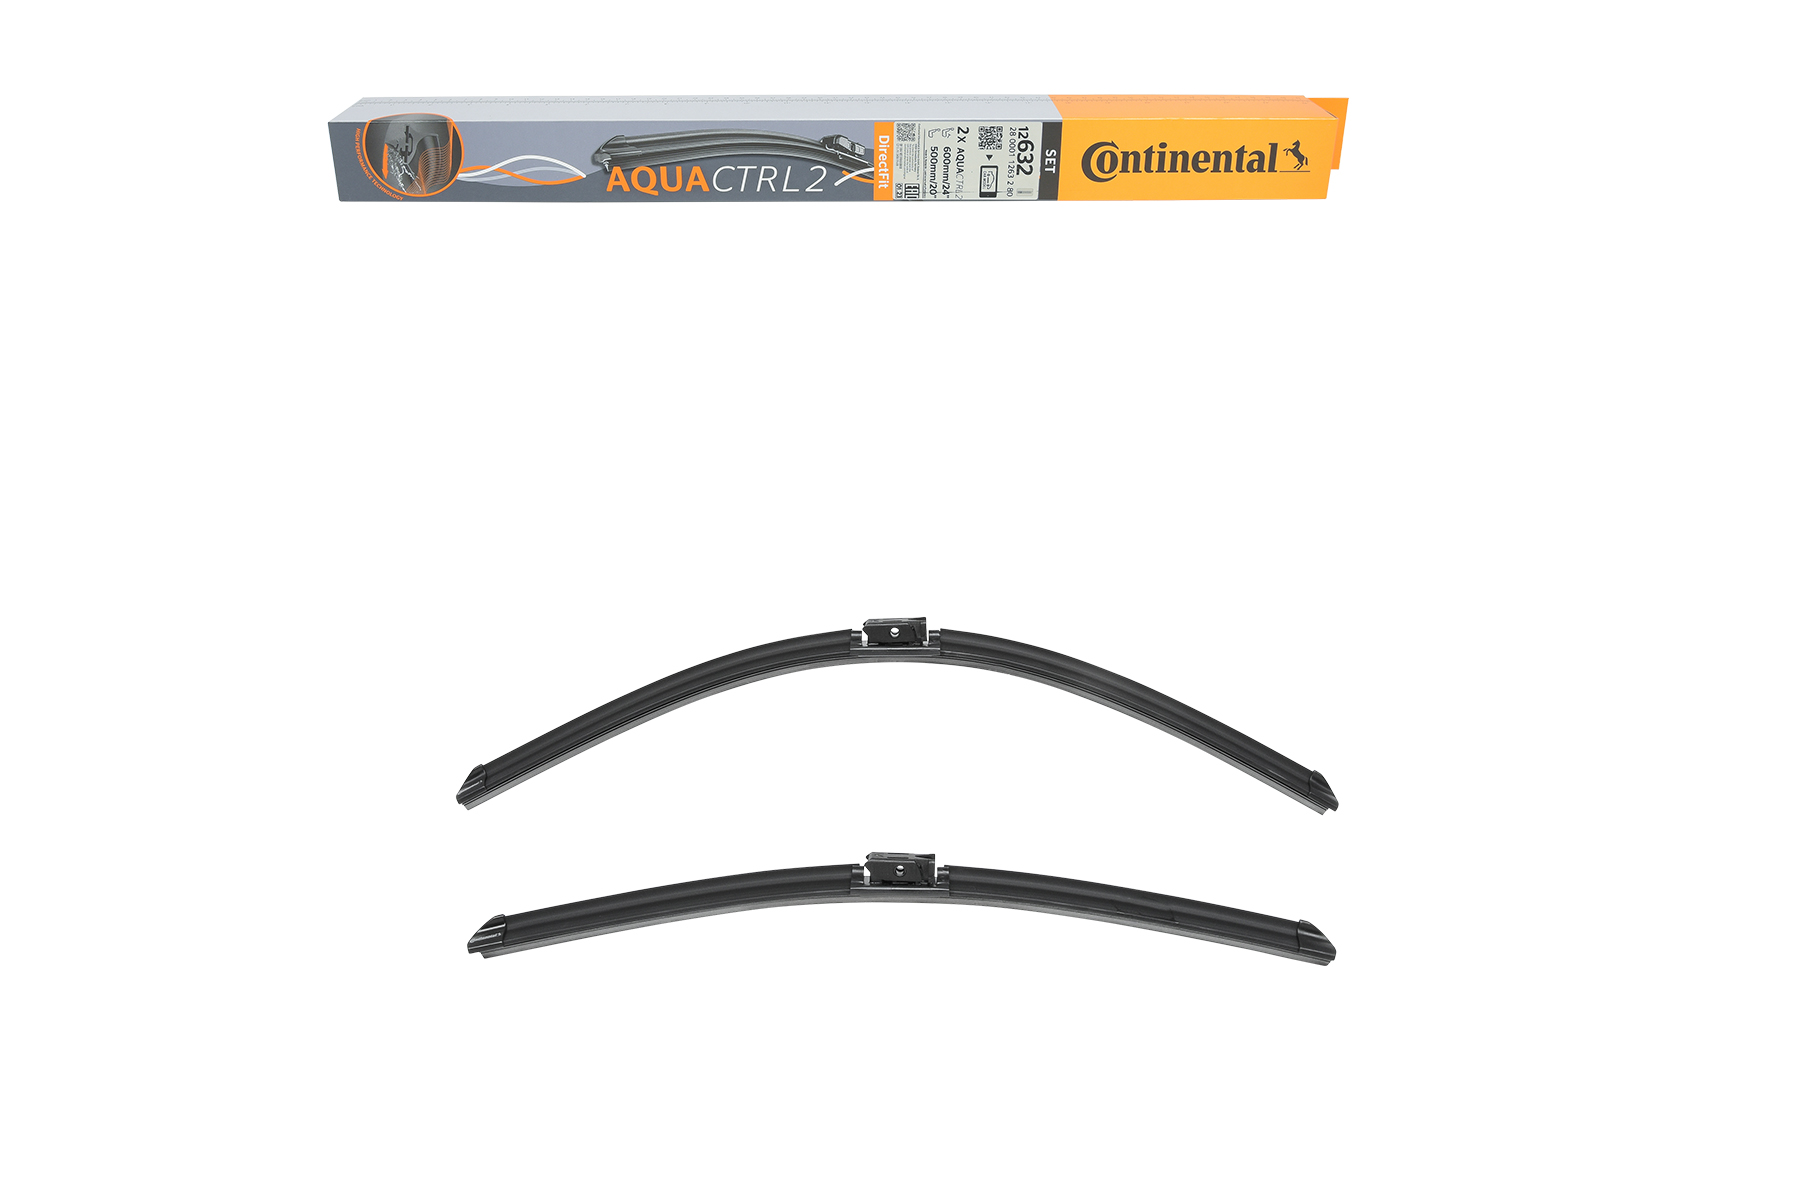 BMW X2 Windscreen cleaning system parts - Wiper blade Continental 2800011263280